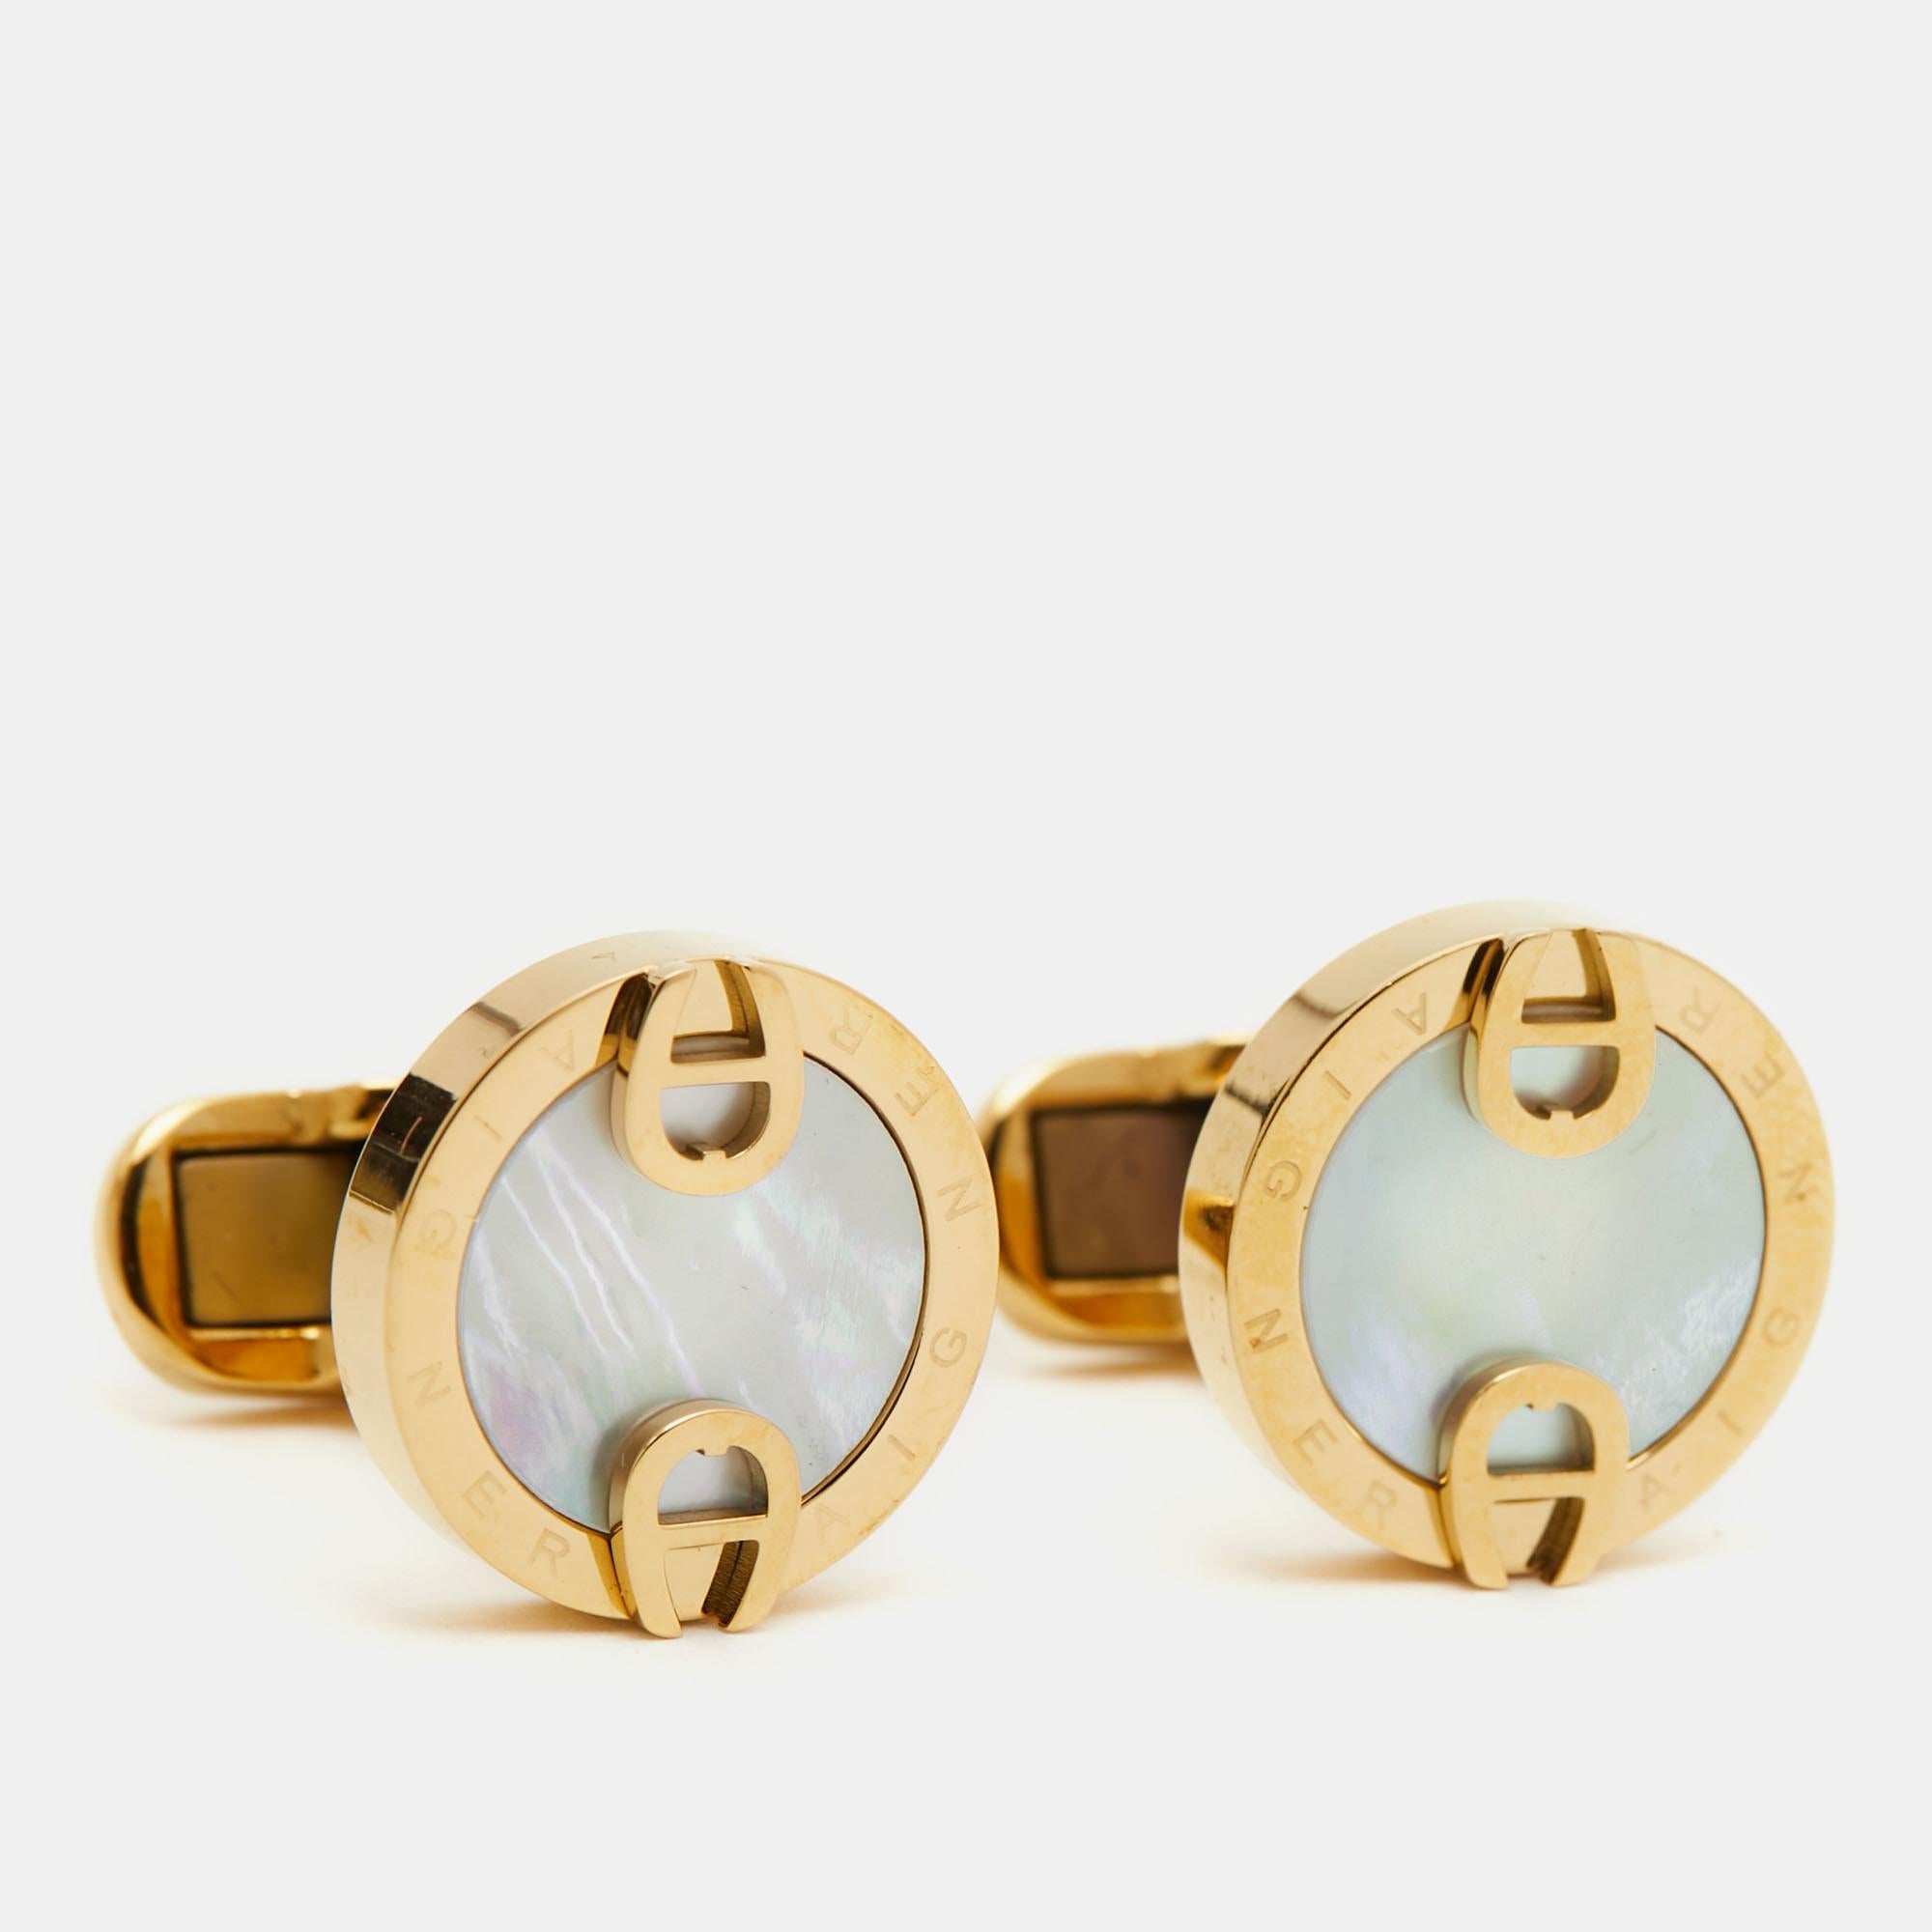 Contemporary Aigner Mother of Pearl Gold Tone Cufflinks For Sale